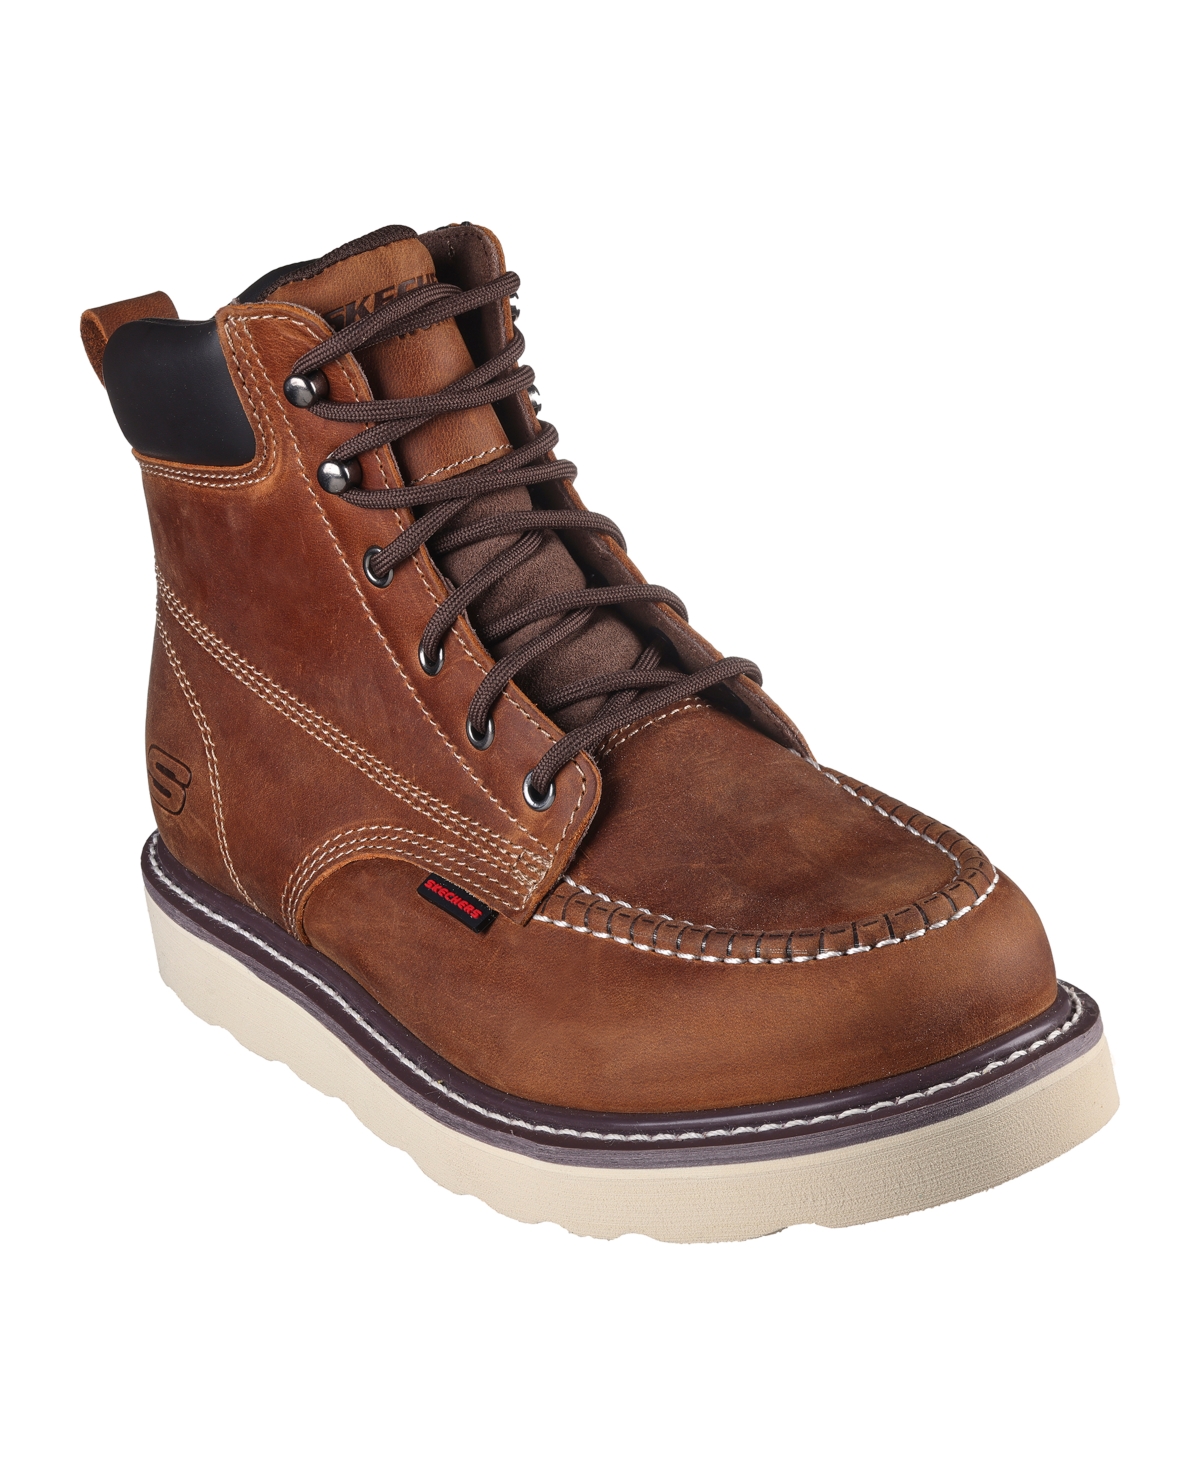 Skechers Work Relaxed Fit- Kadmiel - Bennot Utility Boots from Finish Line | Smart Closet